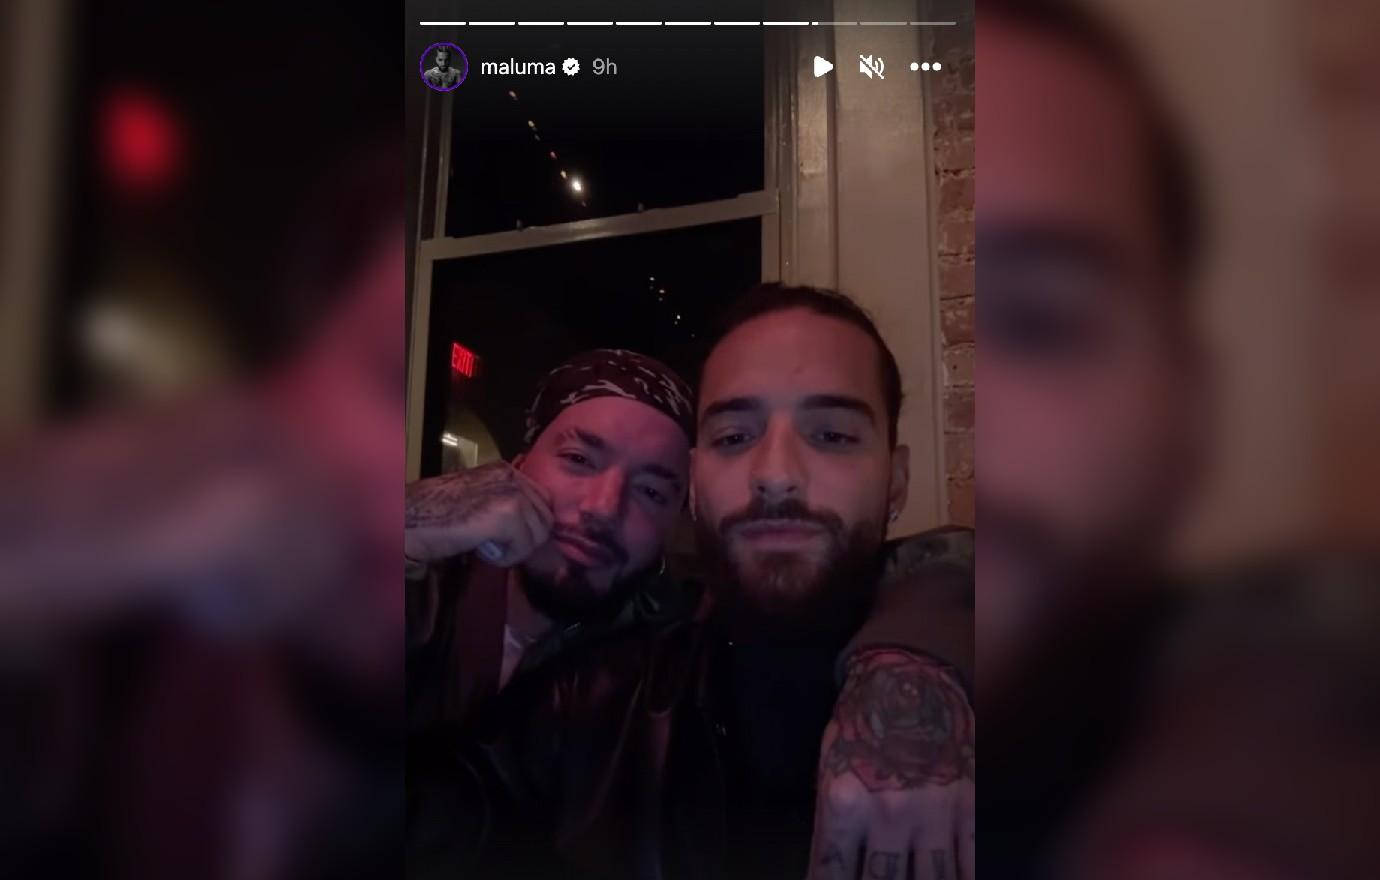 J Balvin was confused for Maluma and his reaction was the best